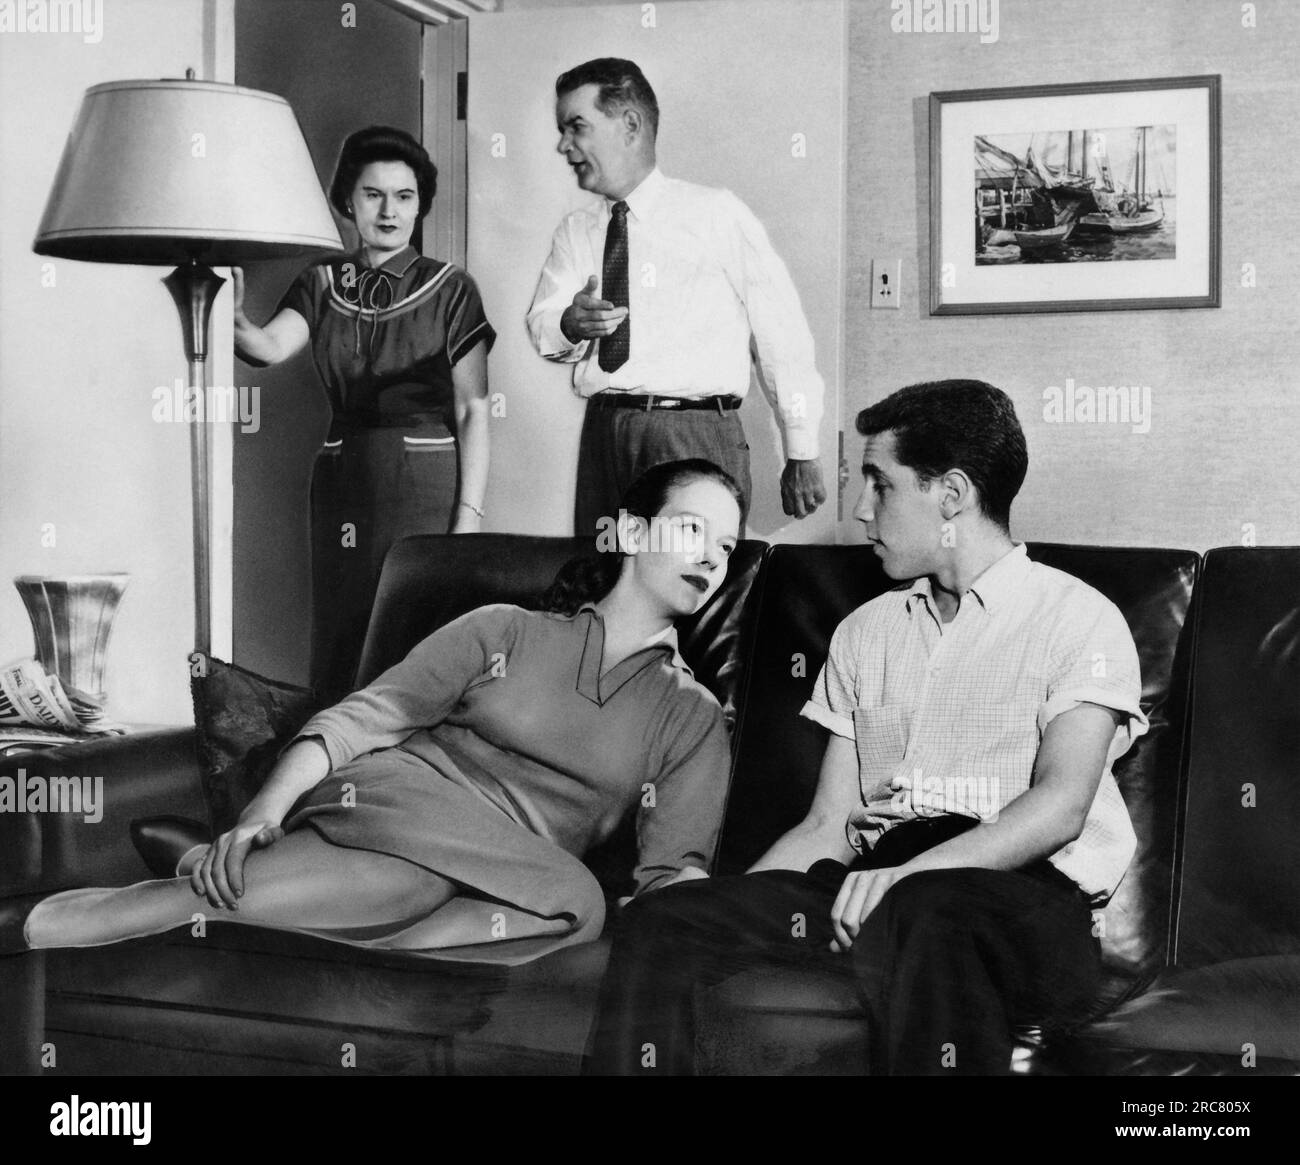 Massachusetts:  September, 1958 A teenage couple sitting on a couch gaze into each other's eyes while the parents show their disapproval. Stock Photo